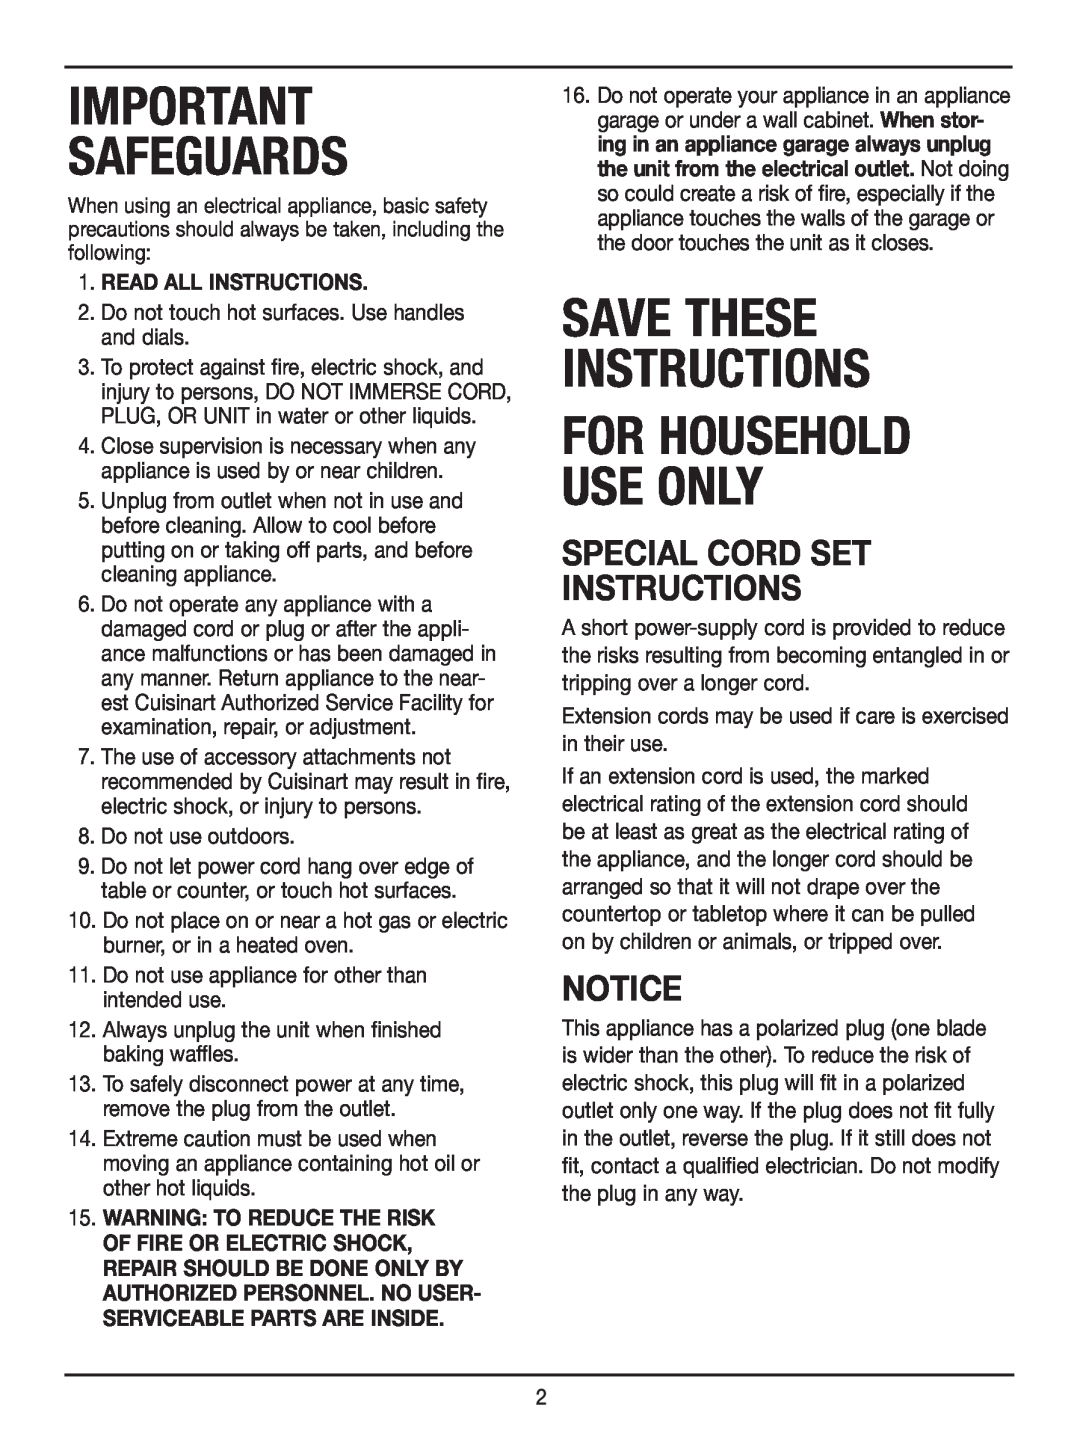 Cuisinart WAF-2OO manual For Household Use Only, Special Cord Set Instructions, Safeguards, Save These Instructions 